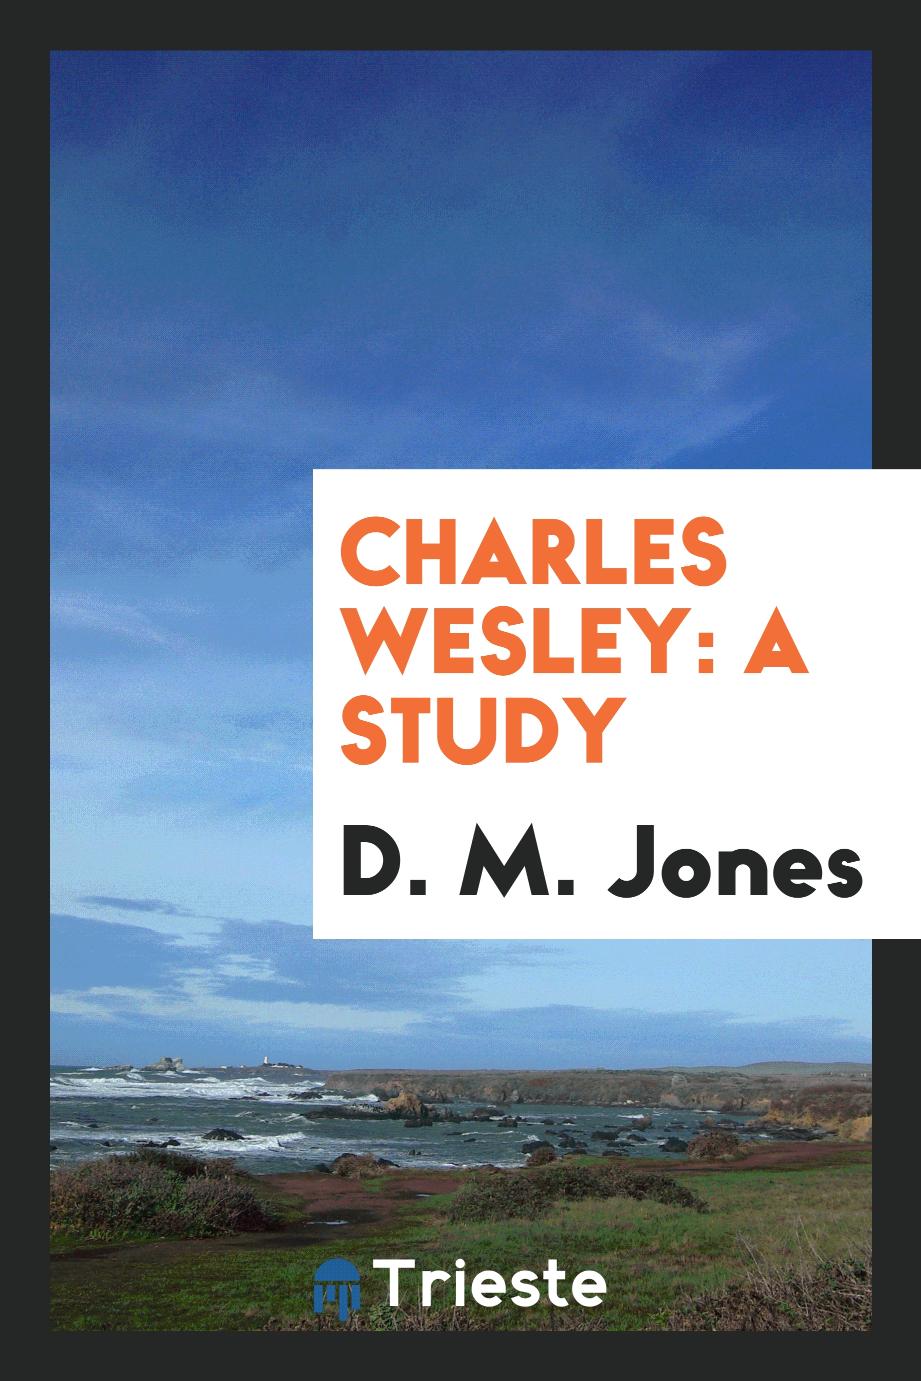 Charles Wesley: a study